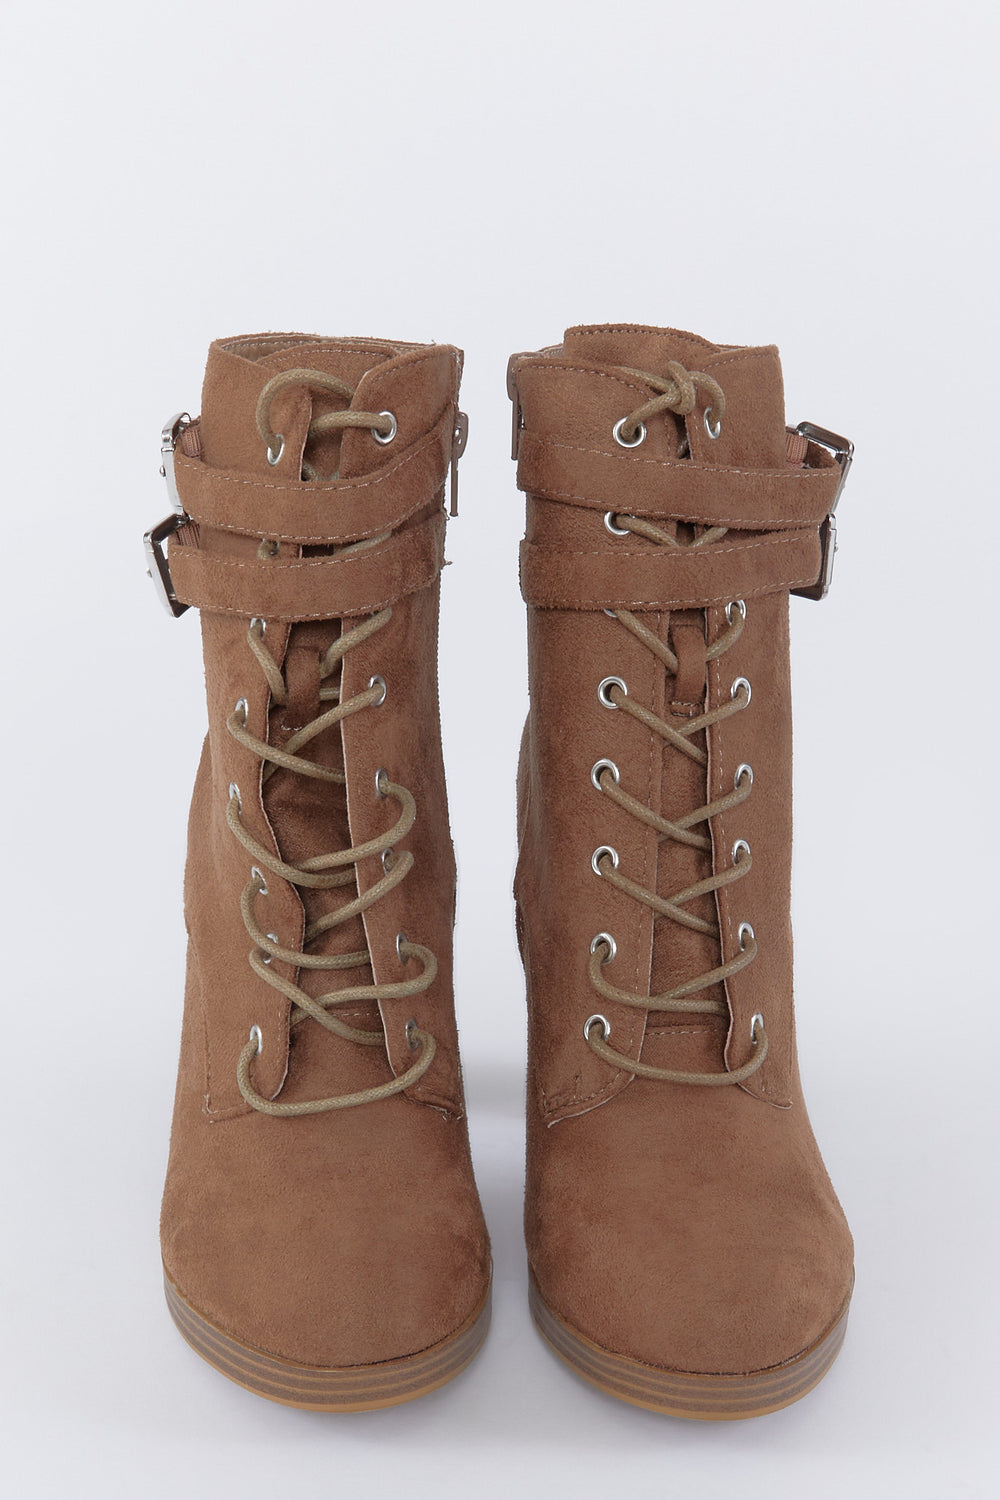 Faux-Suede Lace-Up Buckle Block Heel Boot Brown